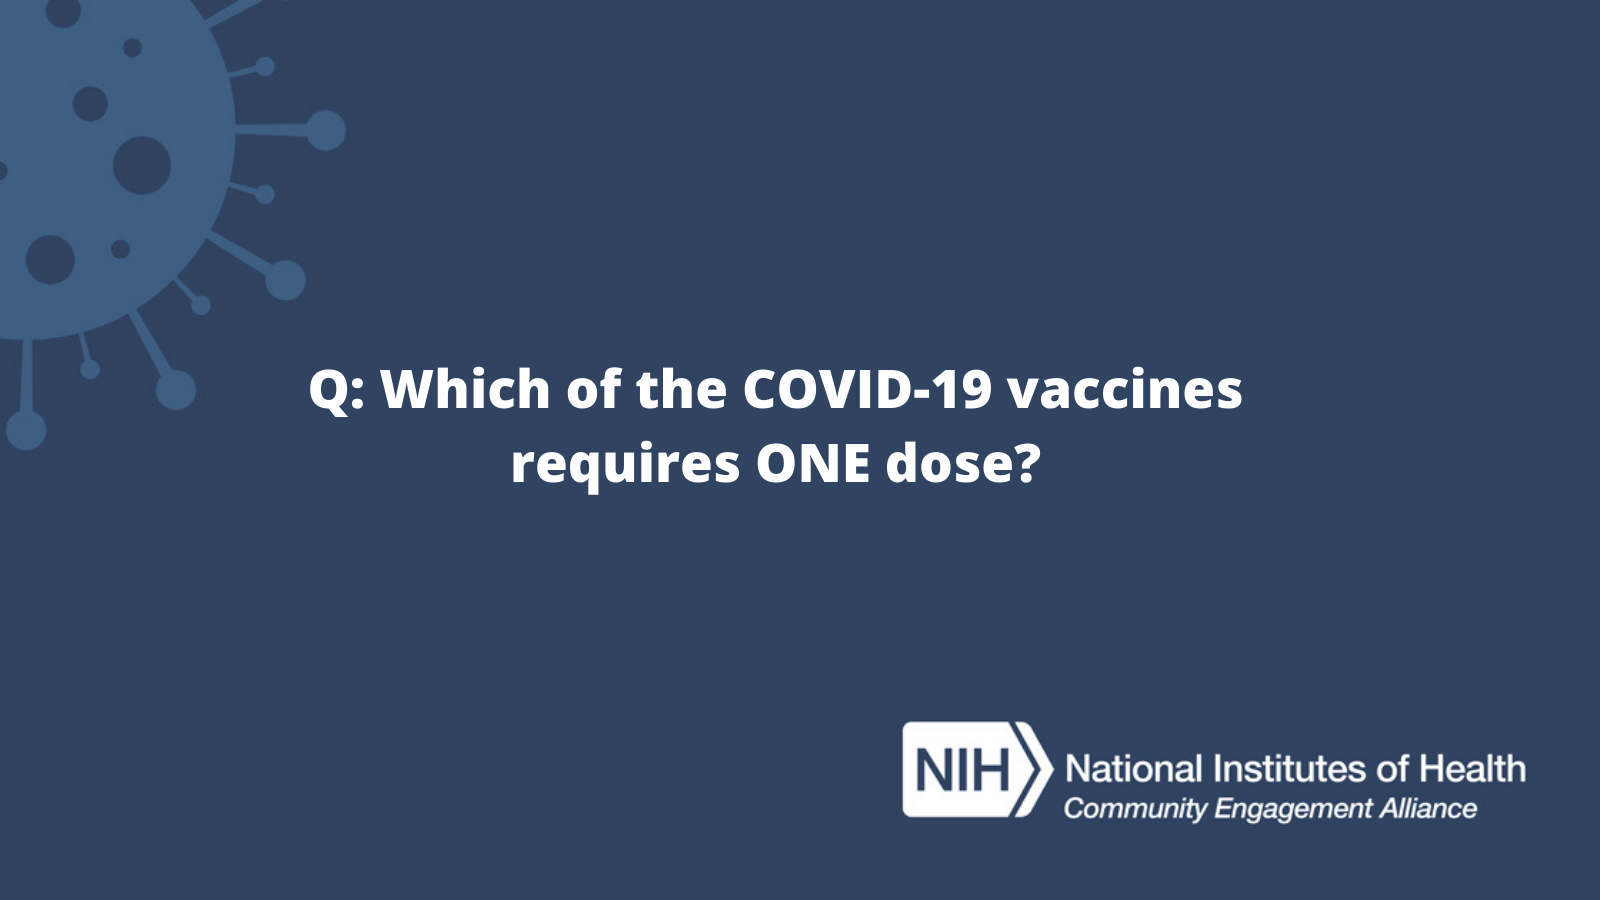 Q: Which of the COVID-19 vaccines requires ONE dose? 